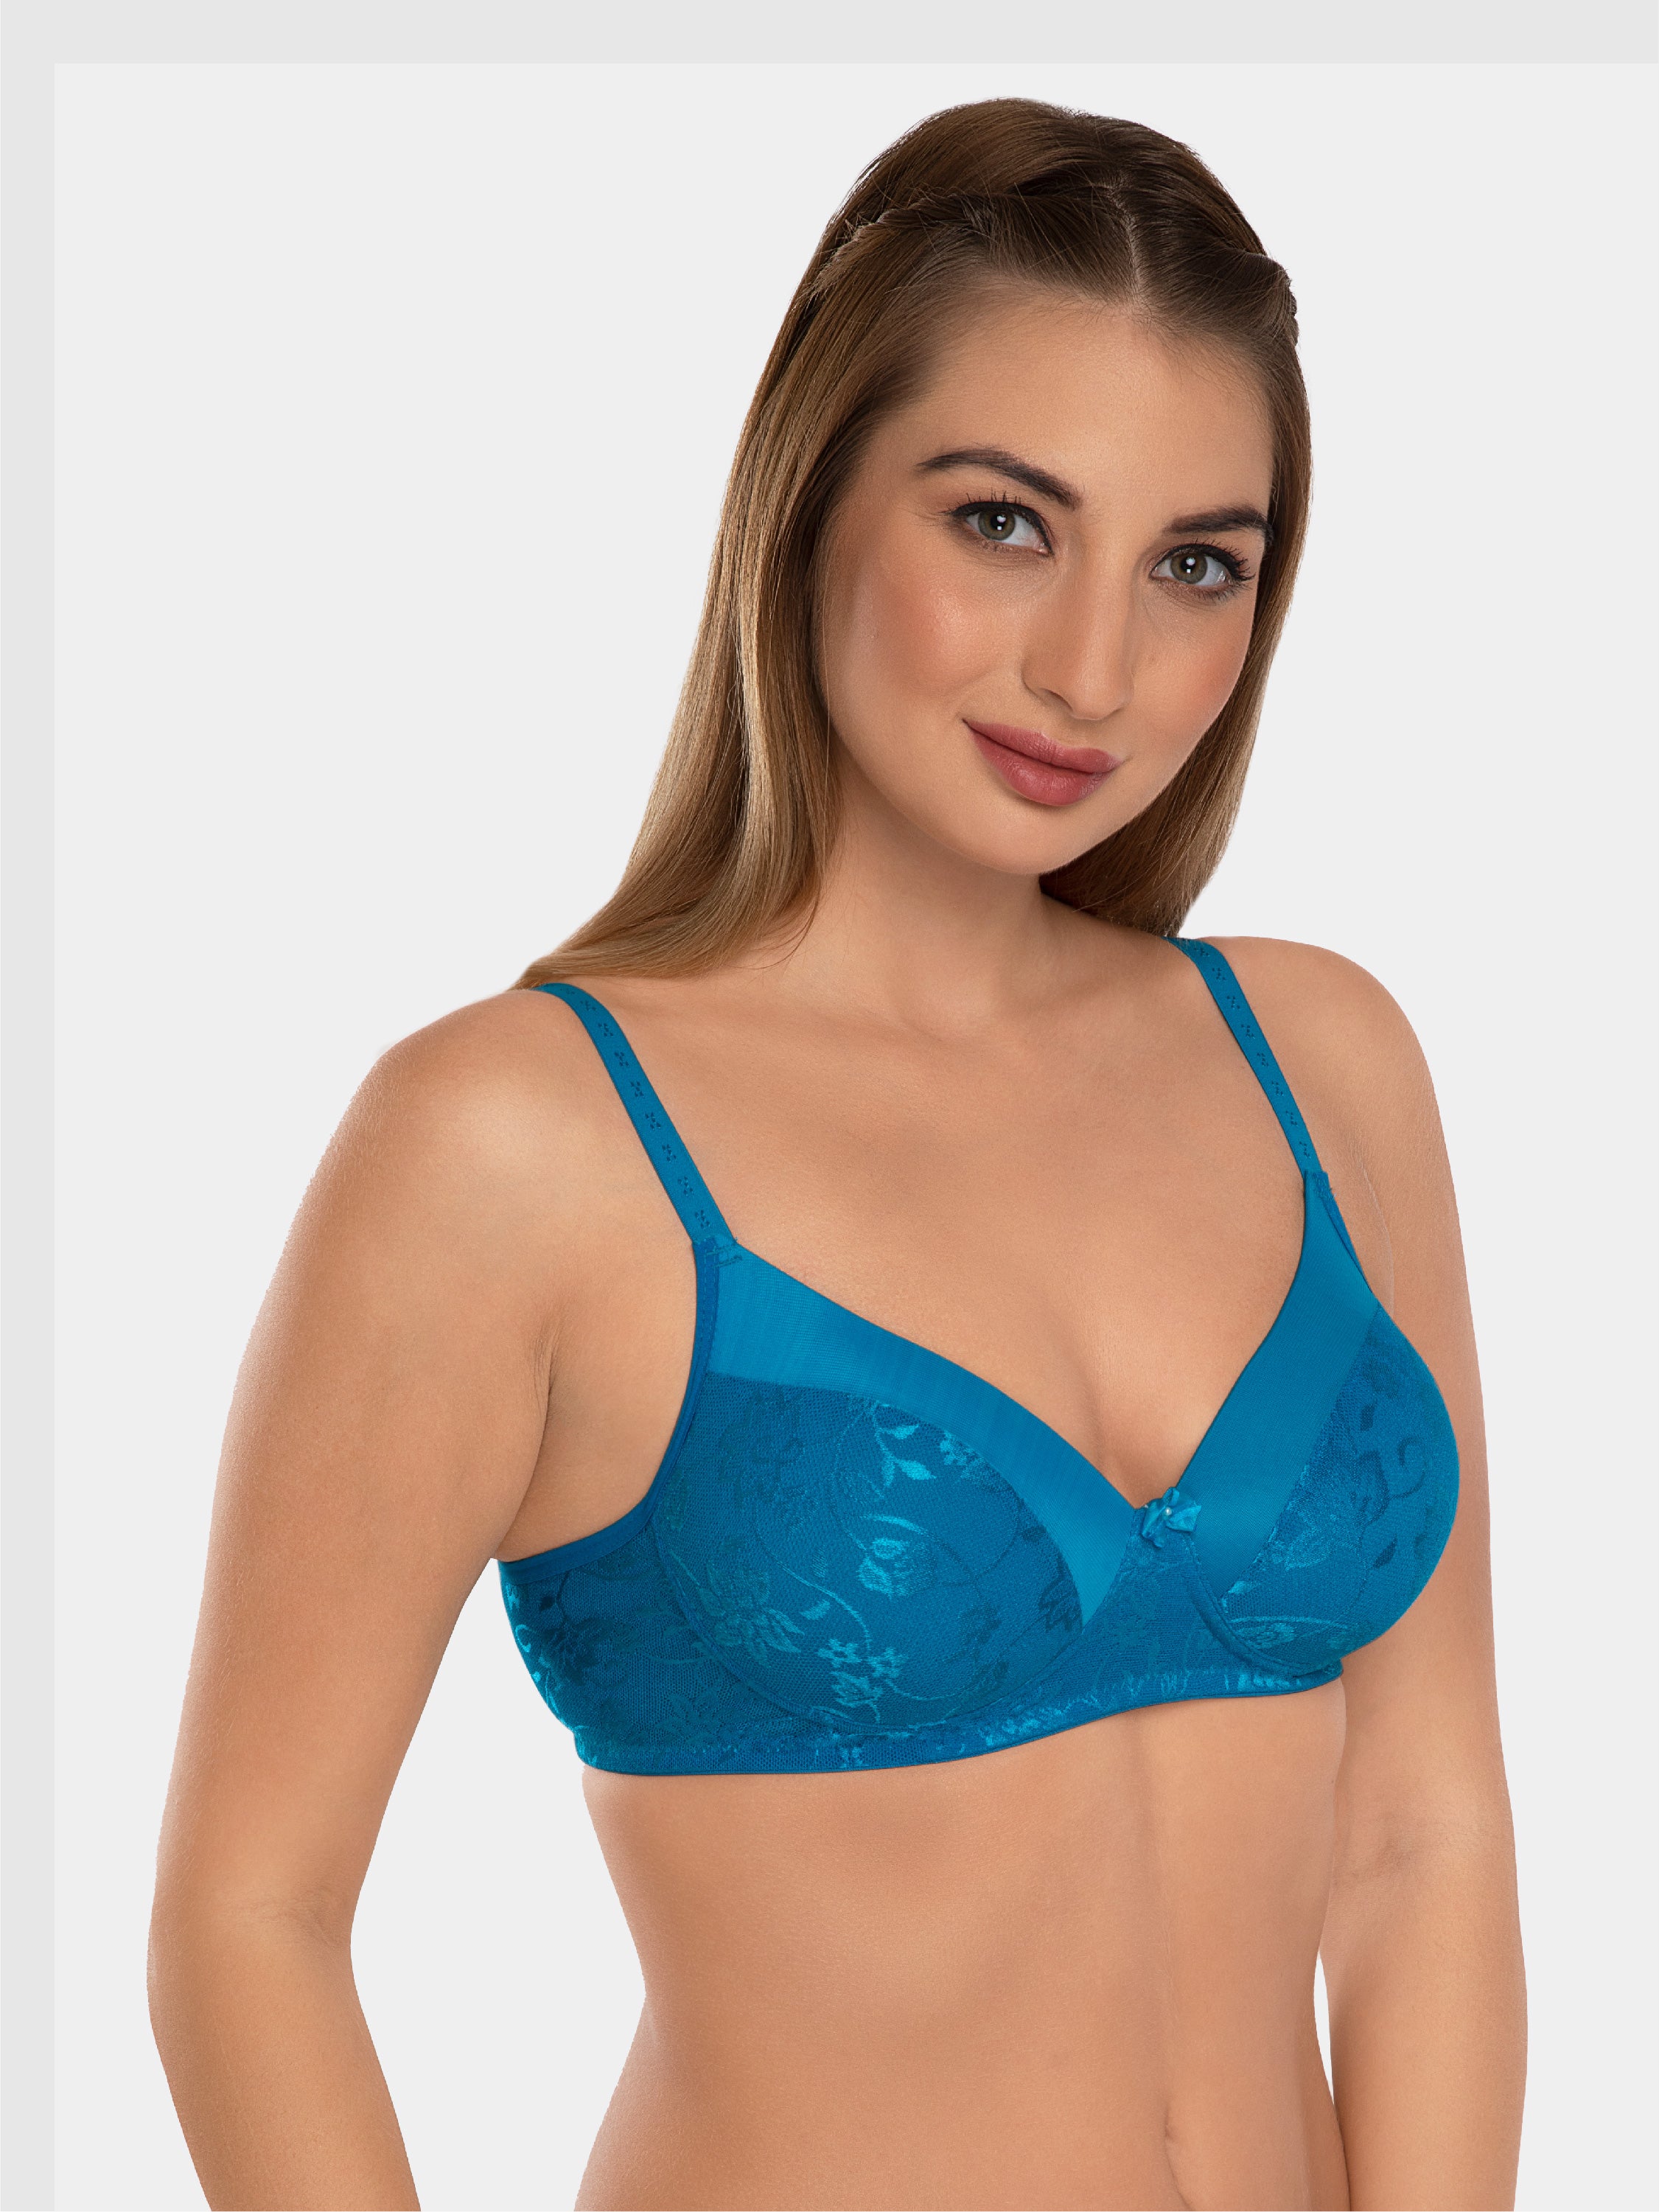 Daisy Dee Turquoise Blue Padded Non Wired Full Coverage Bra NVLR-T.Blue